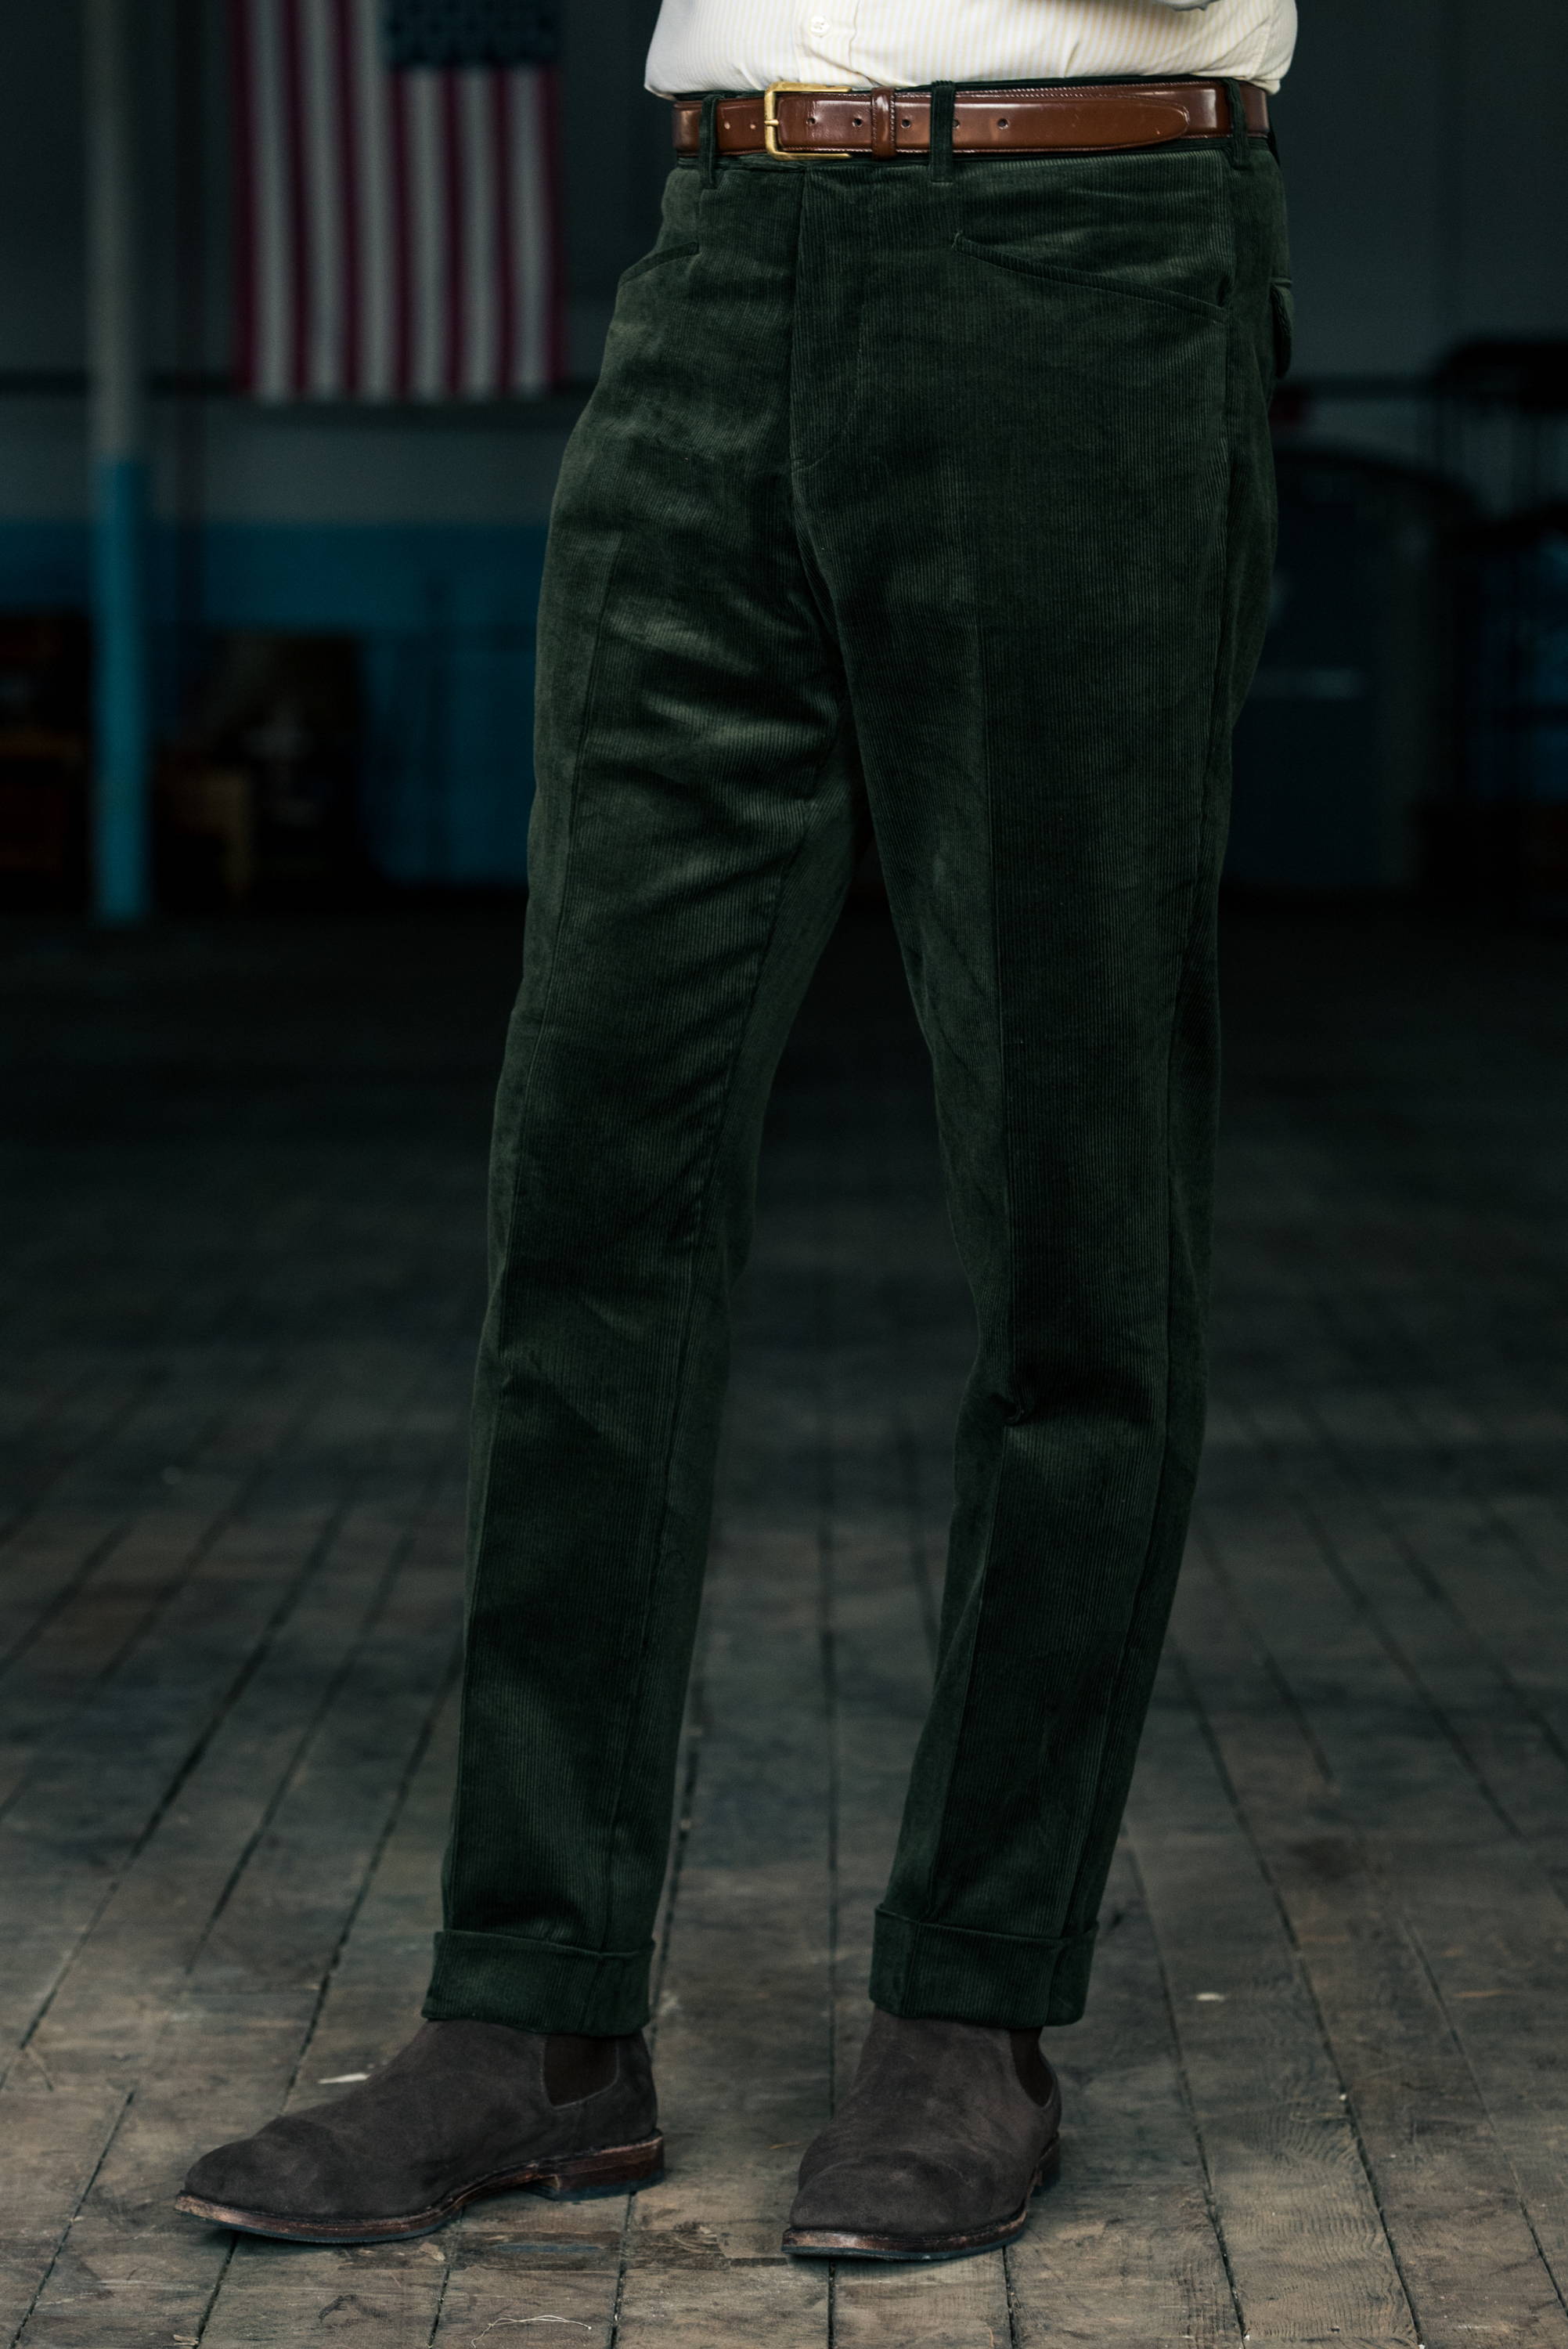 Articles of Style | HOW IT SHOULD FIT: THE TROUSER